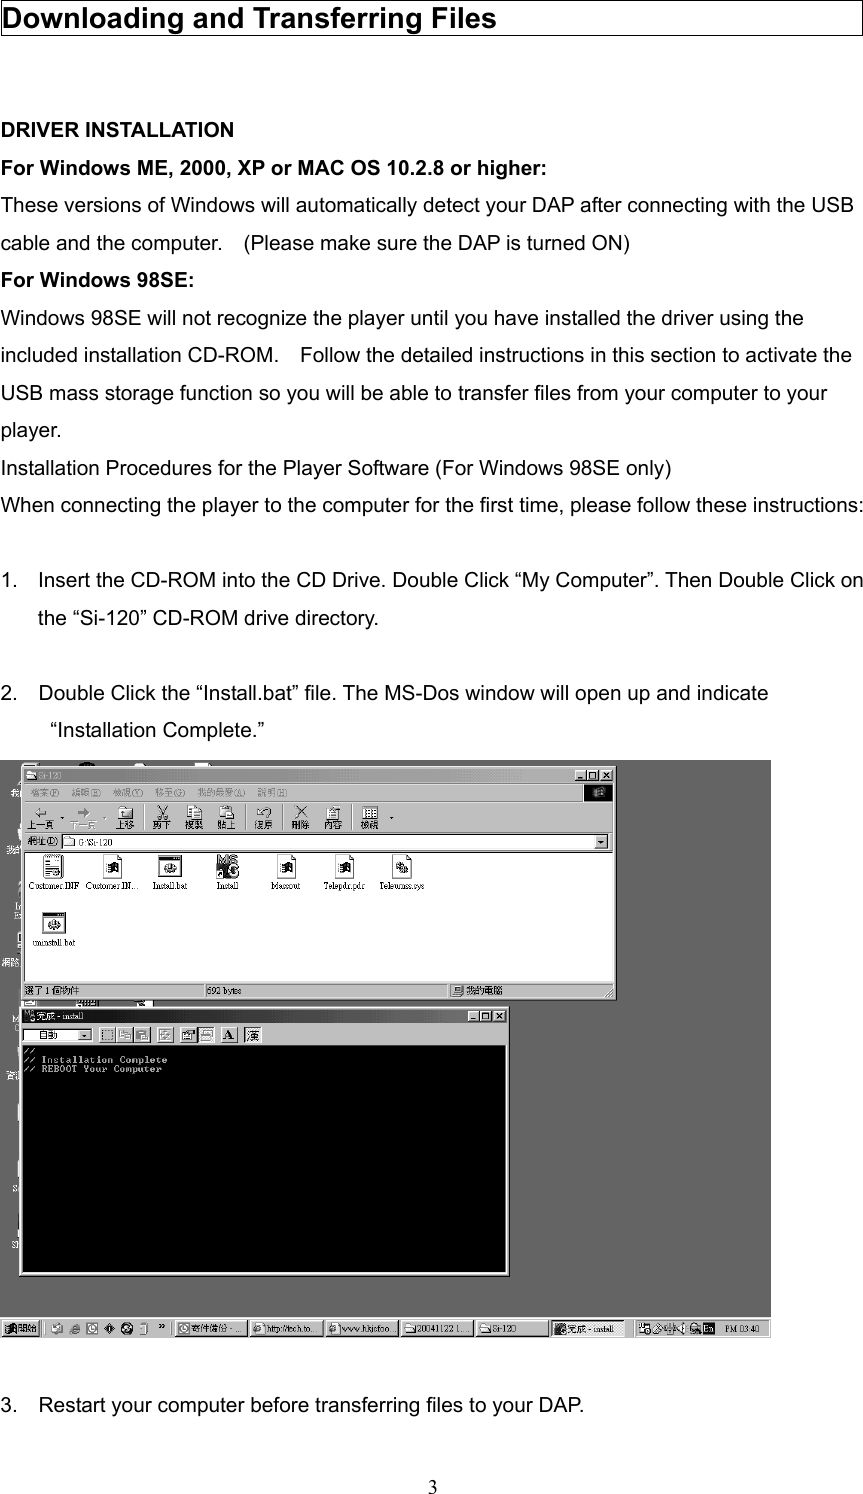  3Downloading and Transferring Files                            DRIVER INSTALLATION For Windows ME, 2000, XP or MAC OS 10.2.8 or higher: These versions of Windows will automatically detect your DAP after connecting with the USB cable and the computer.    (Please make sure the DAP is turned ON)   For Windows 98SE: Windows 98SE will not recognize the player until you have installed the driver using the included installation CD-ROM.    Follow the detailed instructions in this section to activate the USB mass storage function so you will be able to transfer files from your computer to your player.  Installation Procedures for the Player Software (For Windows 98SE only) When connecting the player to the computer for the first time, please follow these instructions:  1.  Insert the CD-ROM into the CD Drive. Double Click “My Computer”. Then Double Click on the “Si-120” CD-ROM drive directory.      2.  Double Click the “Install.bat” file. The MS-Dos window will open up and indicate “Installation Complete.”     3.    Restart your computer before transferring files to your DAP. 